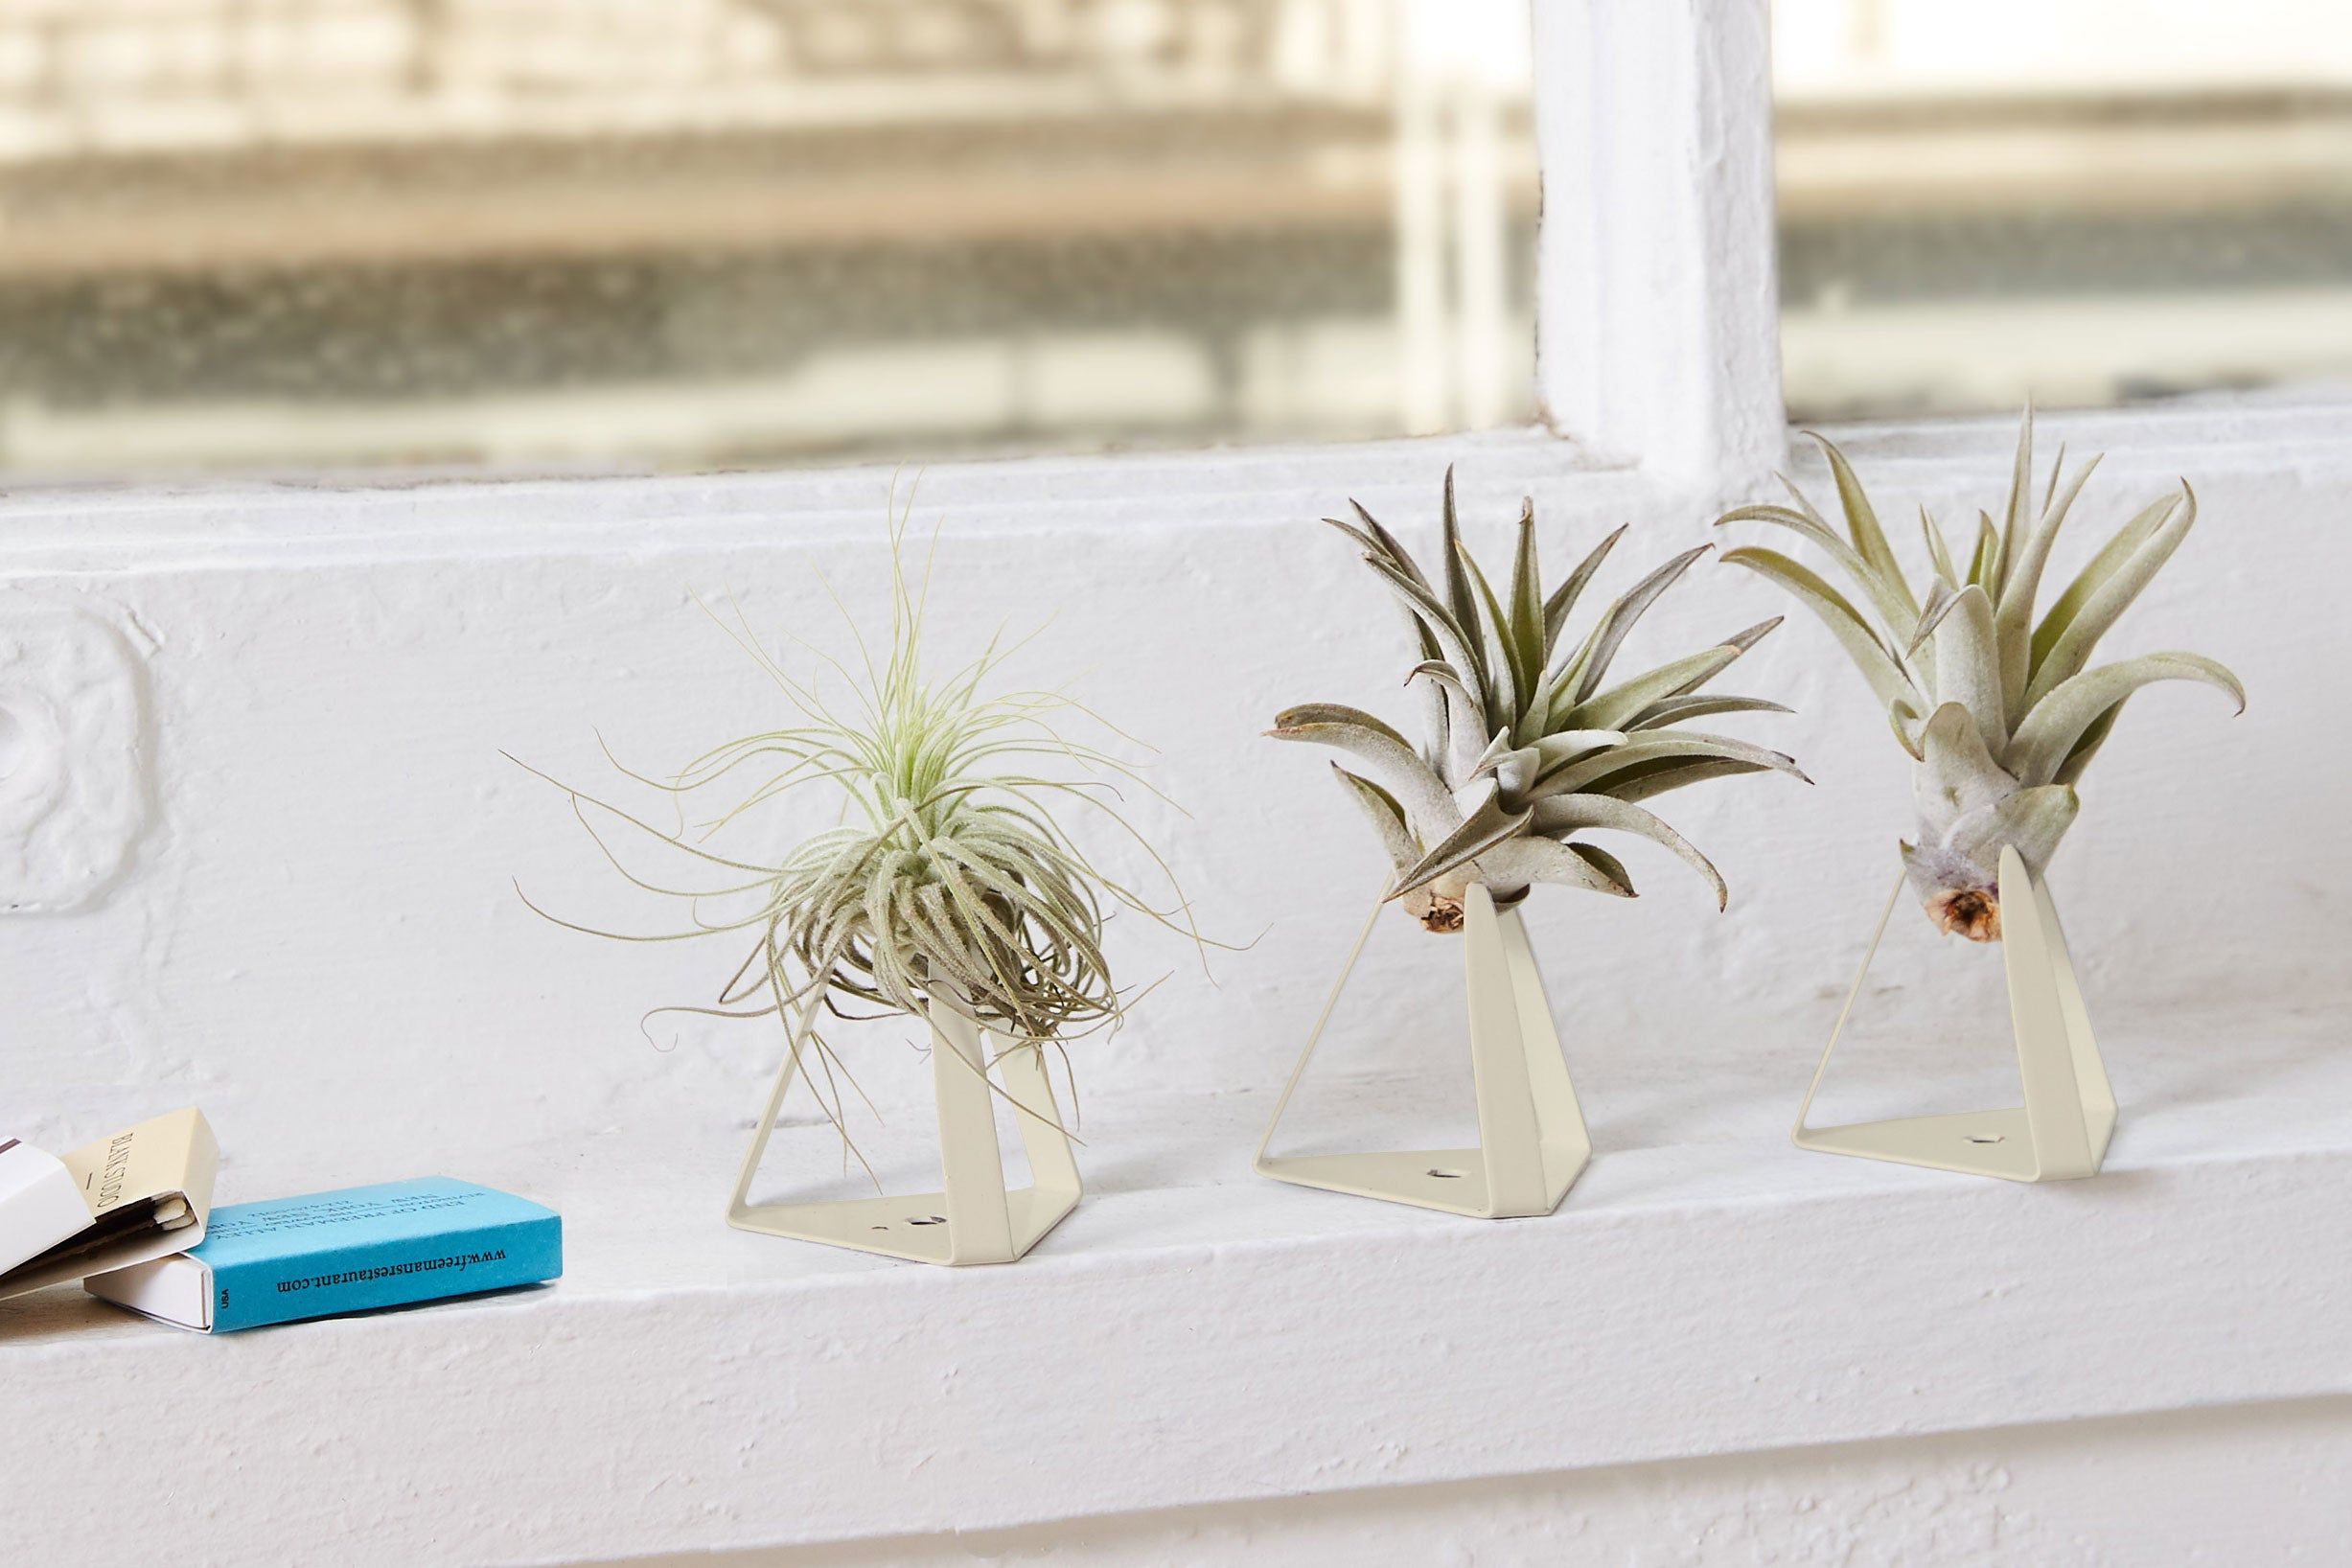 BEST TIPS: HOW TO CARE FOR AIR PLANTS, AIR PLANT CARE GUIDE